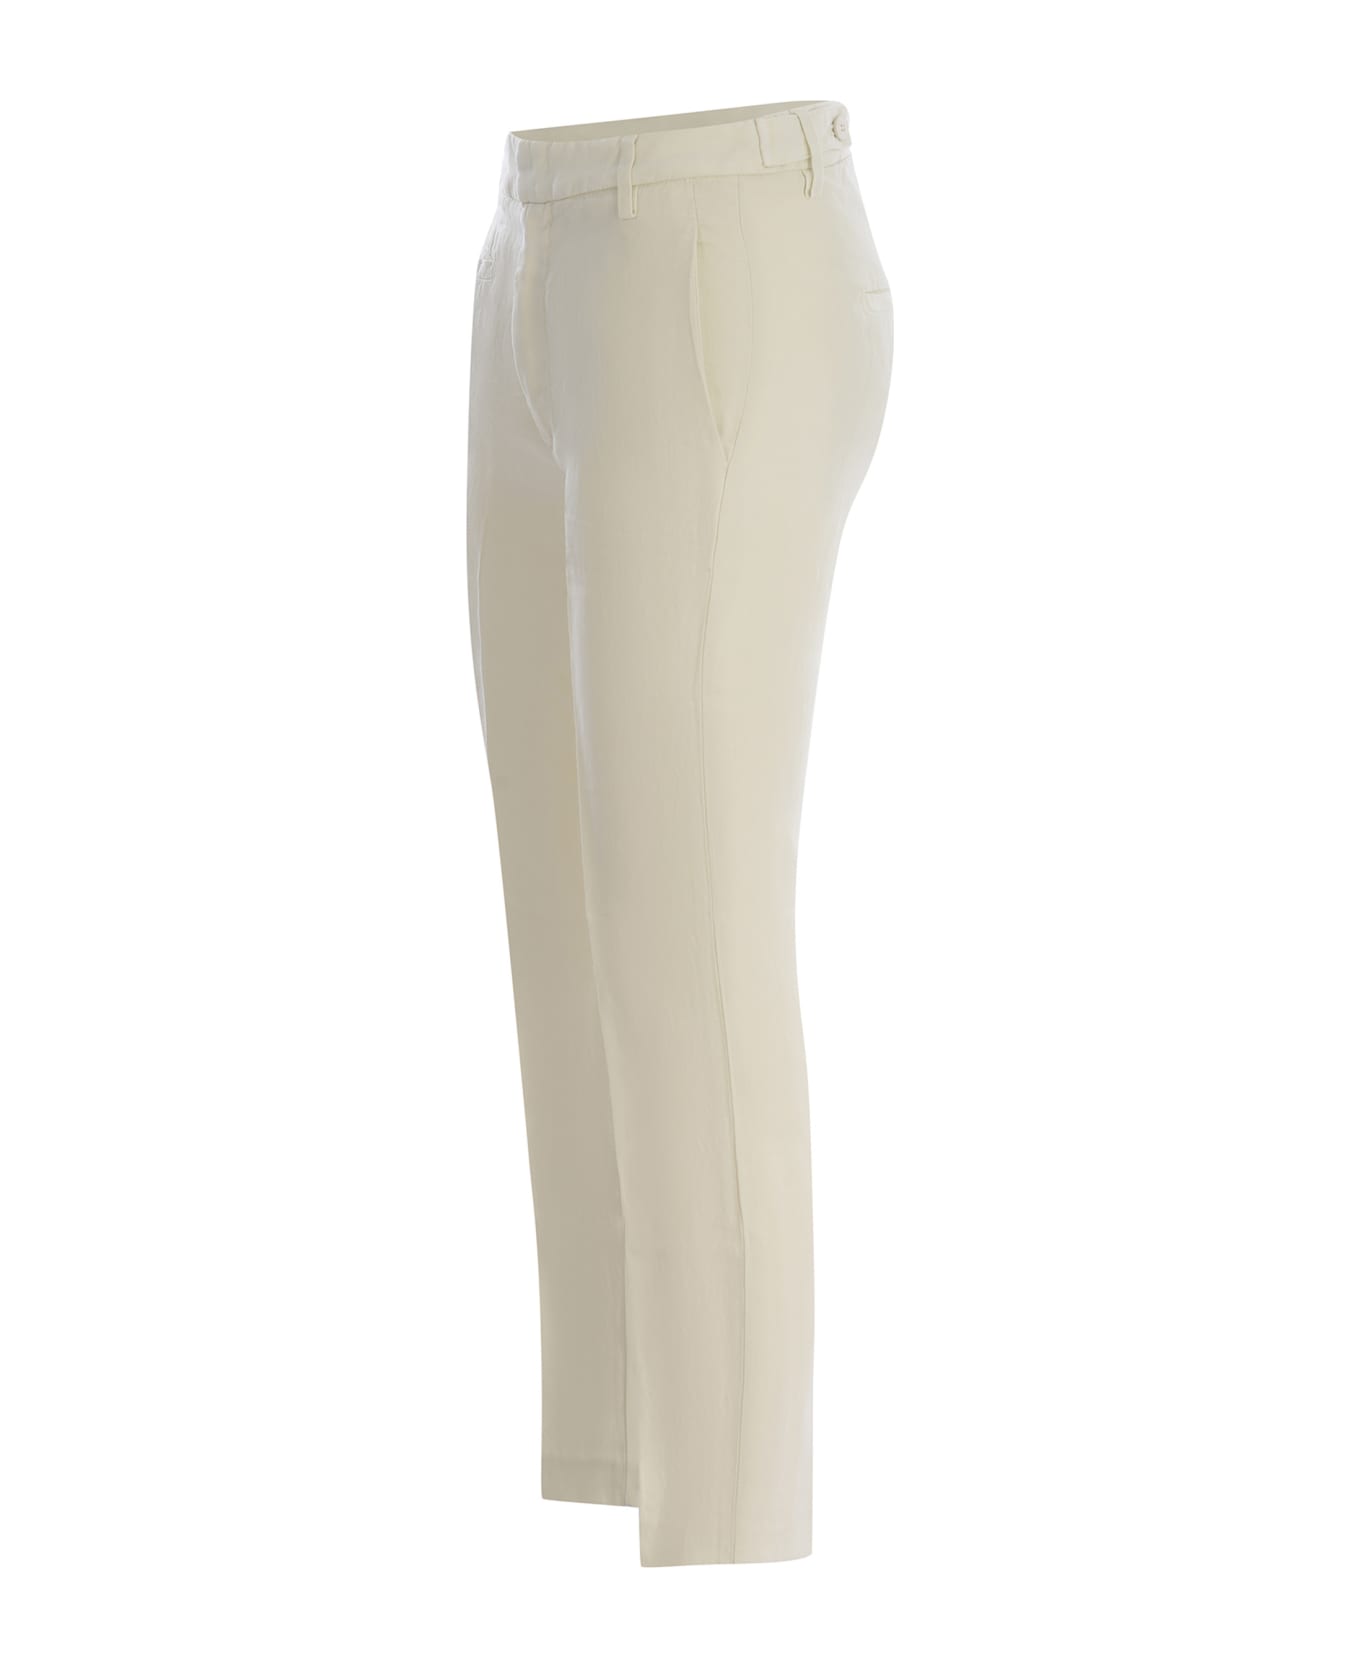 Dondup Trousers Dondup "ariel 27inches" Made Of Linen Blend - Crema